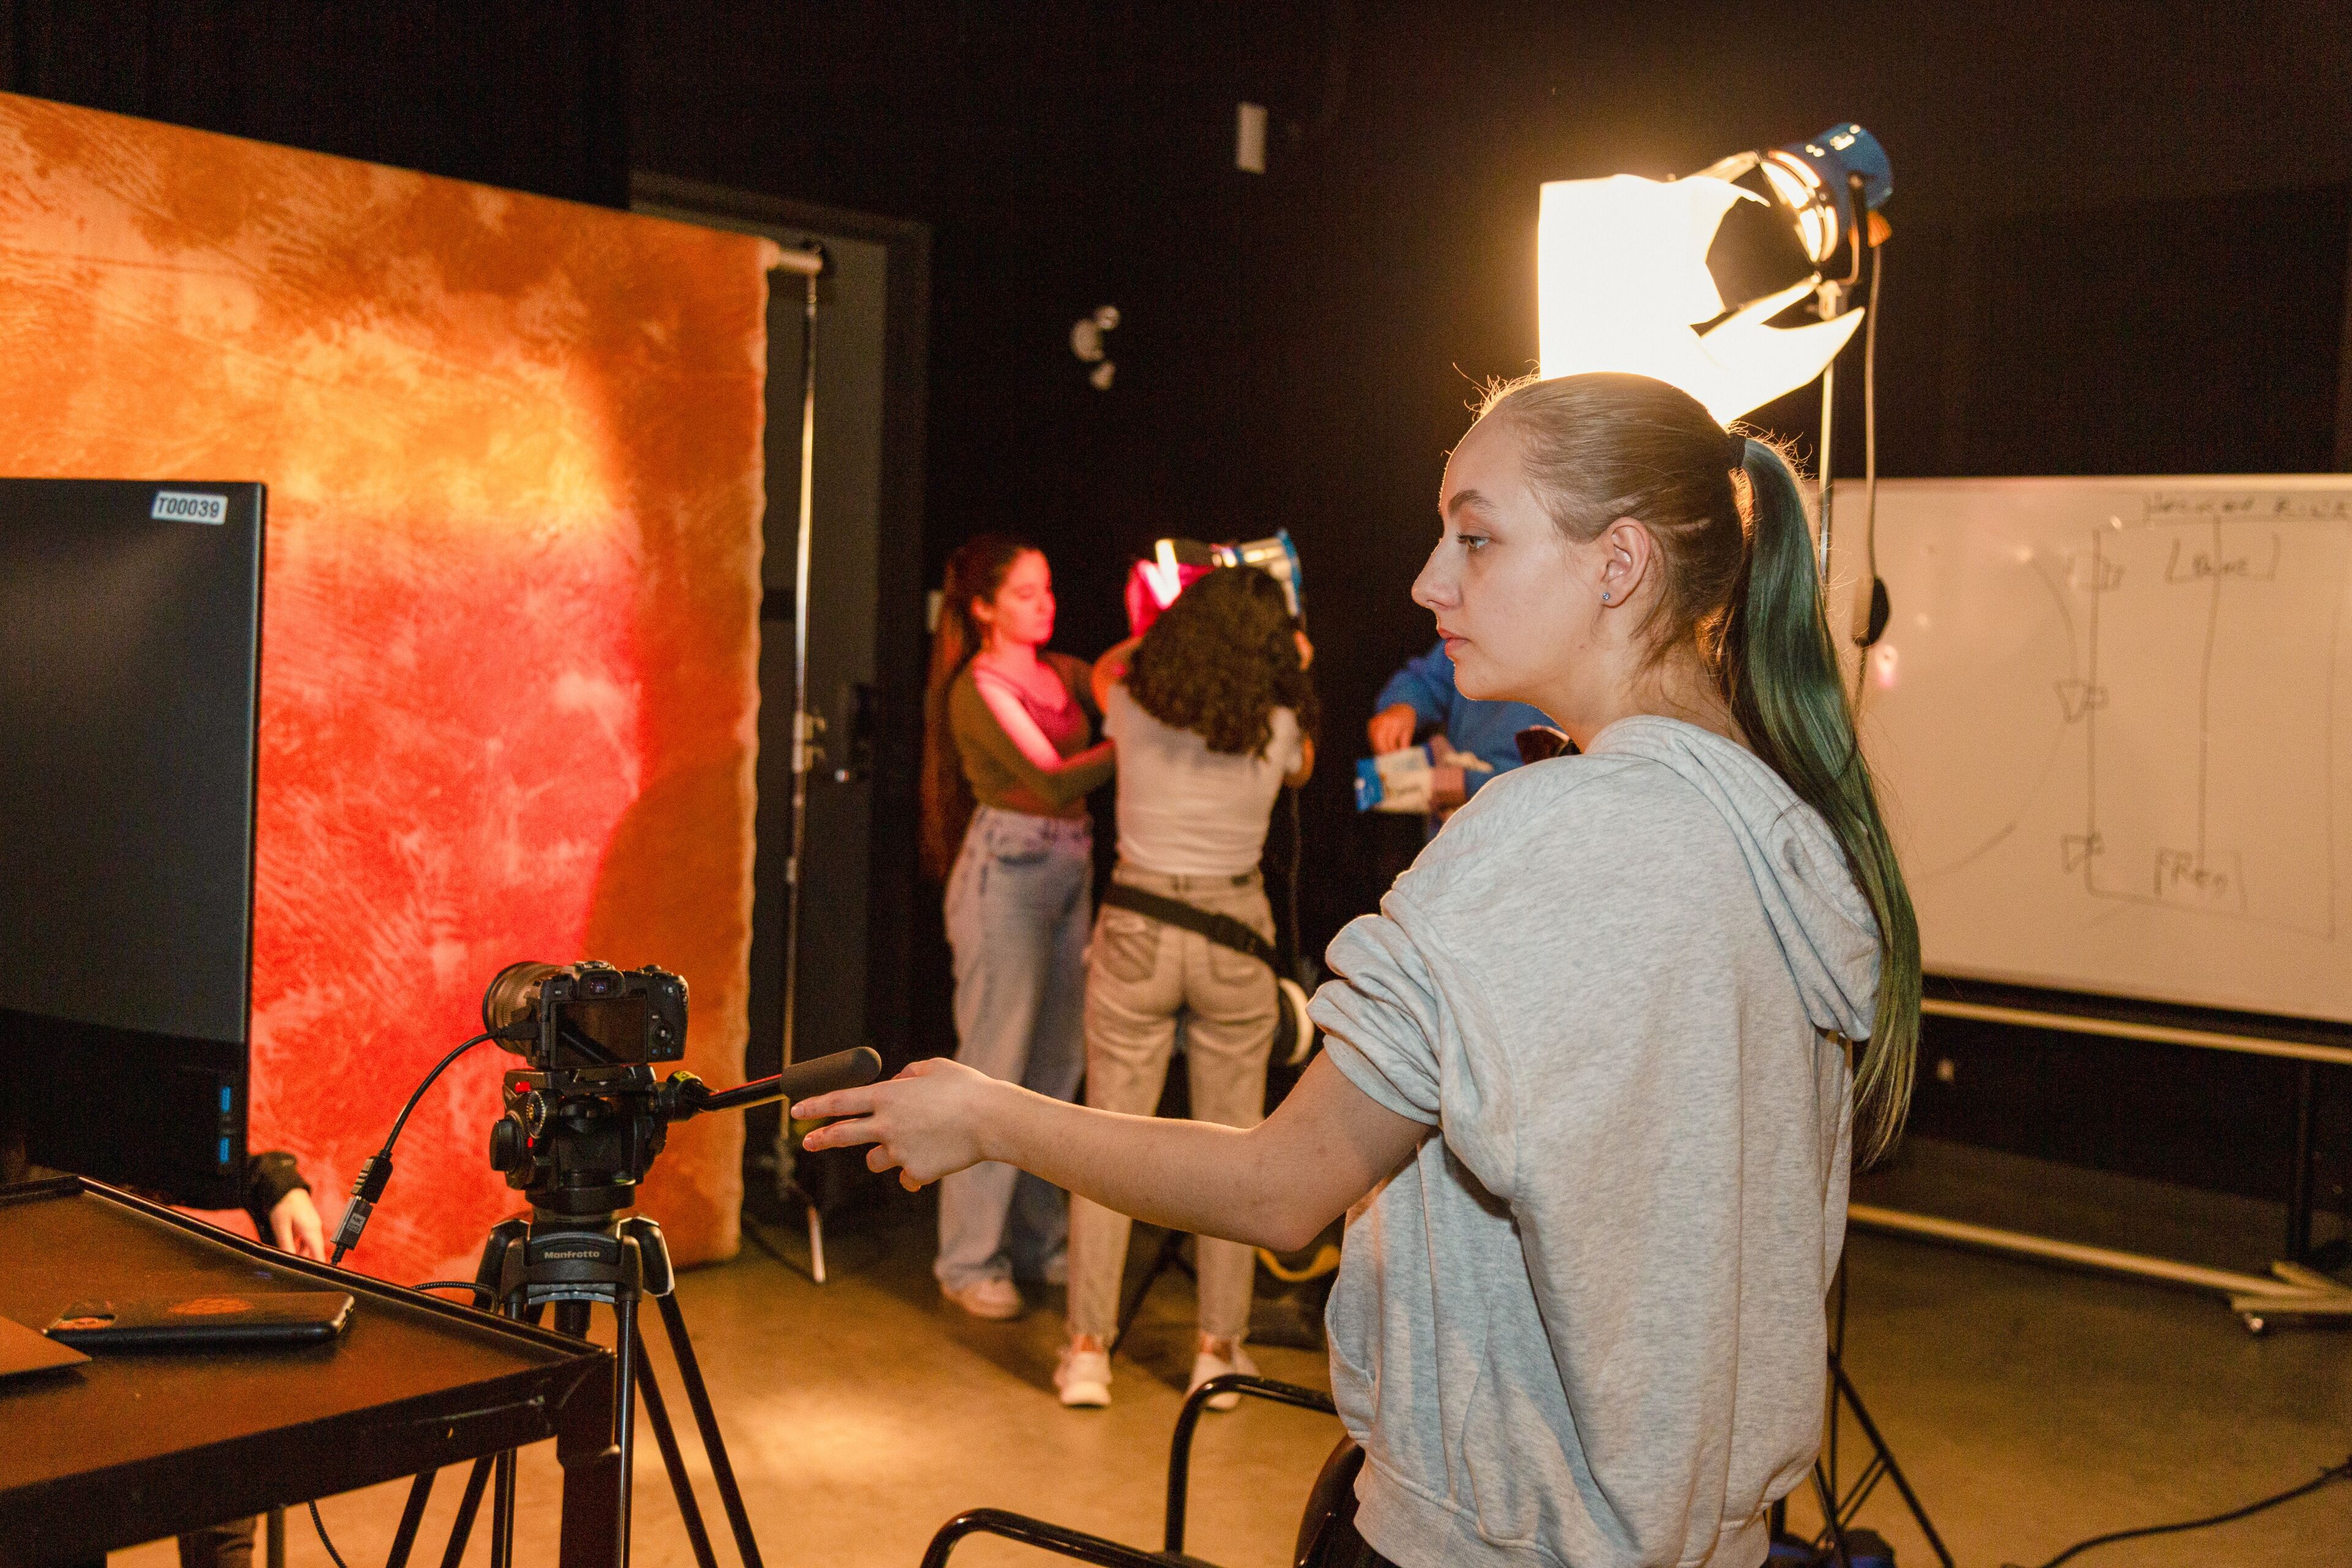 A woman directs a scene, pointing towards a camera on a tripod with studio lights and participants in the background.